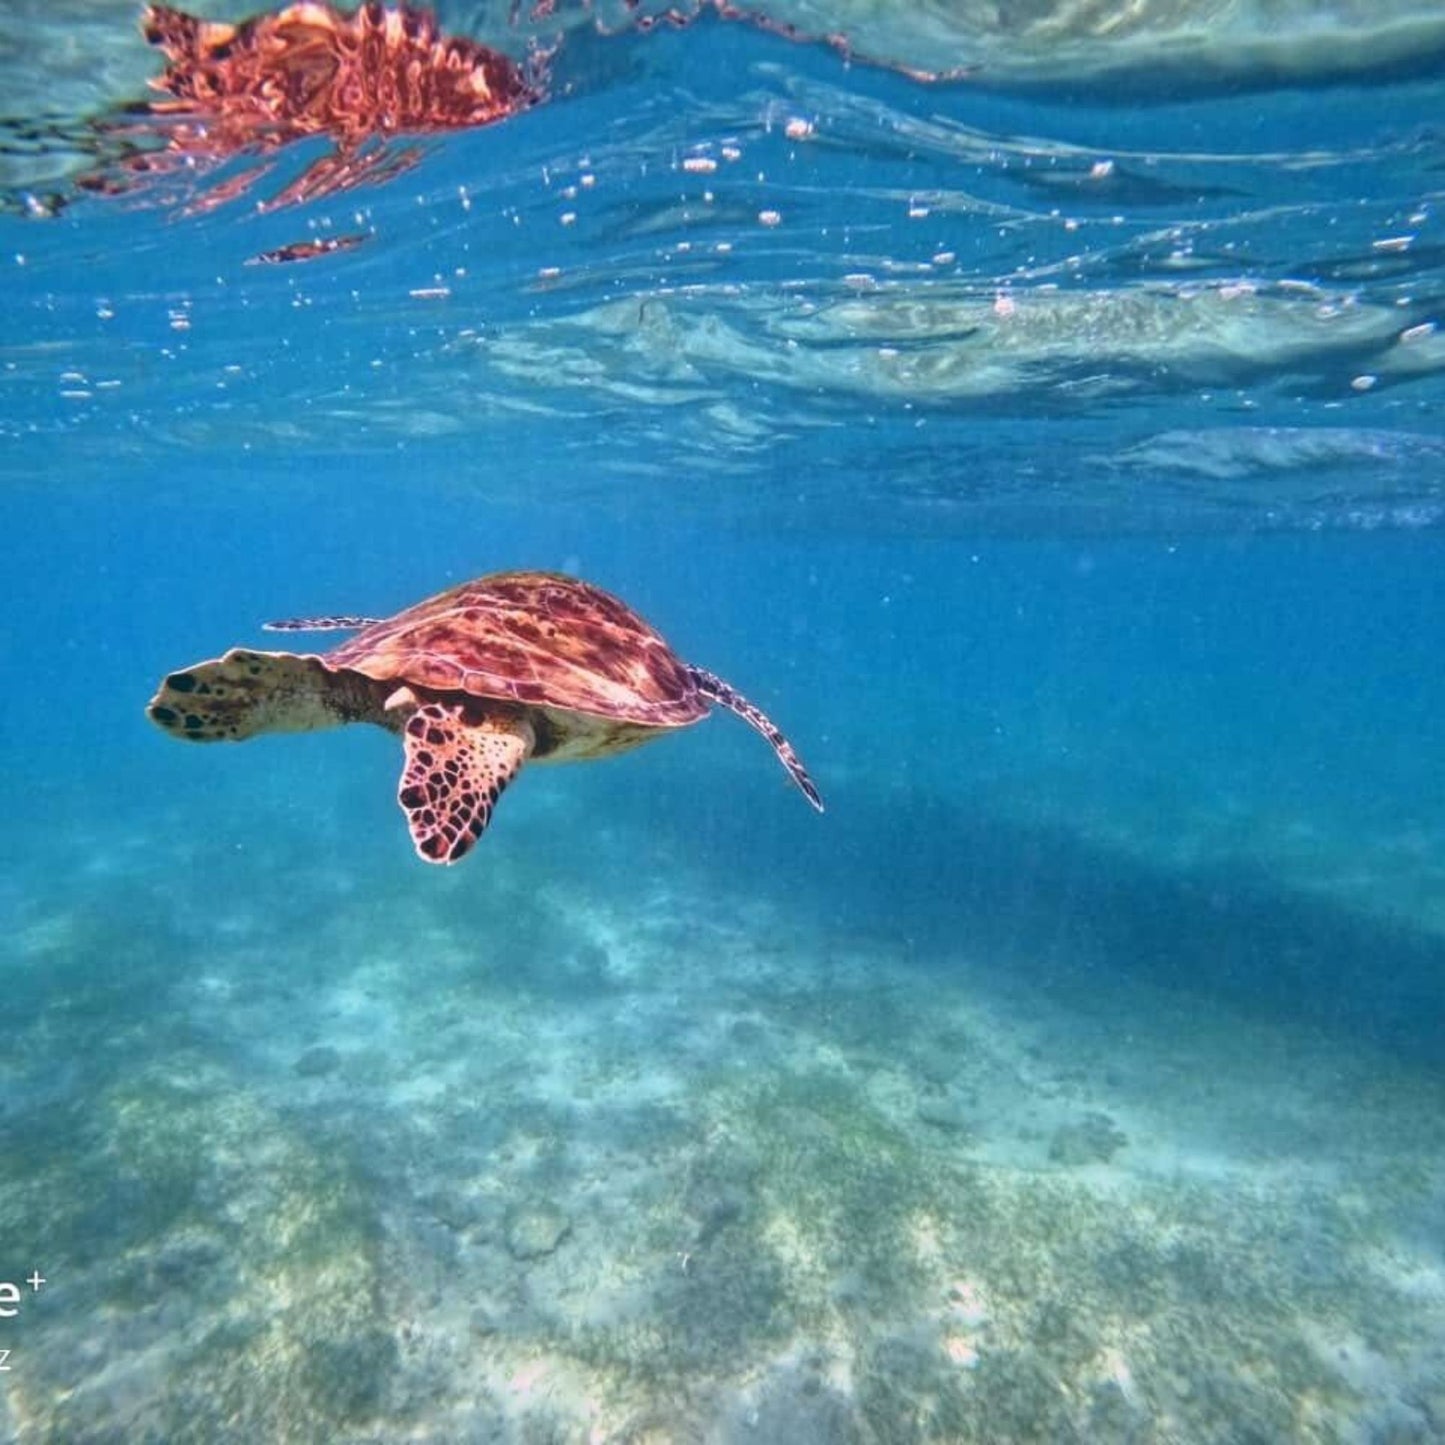 -50% for Snorkeling at Mirissa: guide + swimming to enjoy green turtles, corals, fish and more